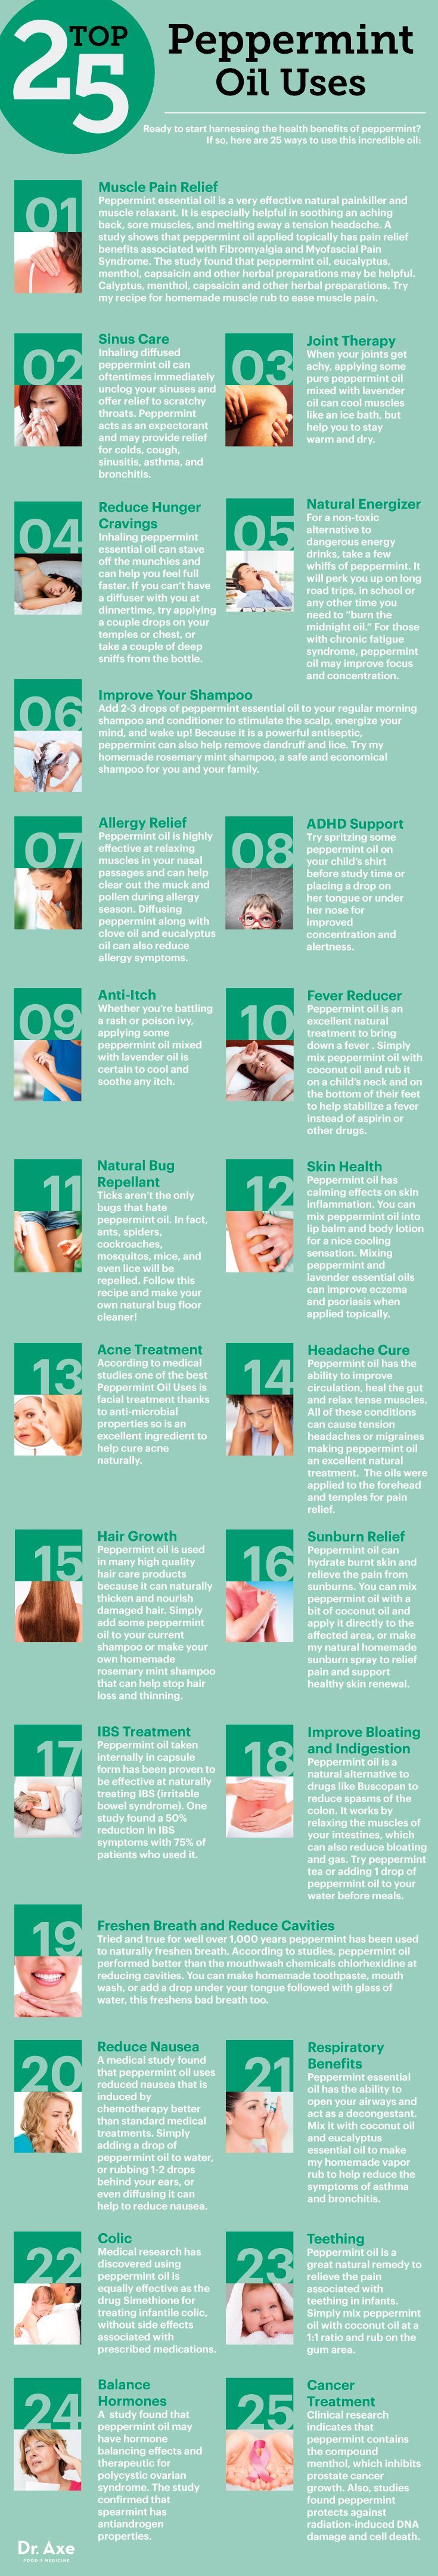 Top 25 Peppermint Essential Oil Uses and Benefits  www.draxe.com